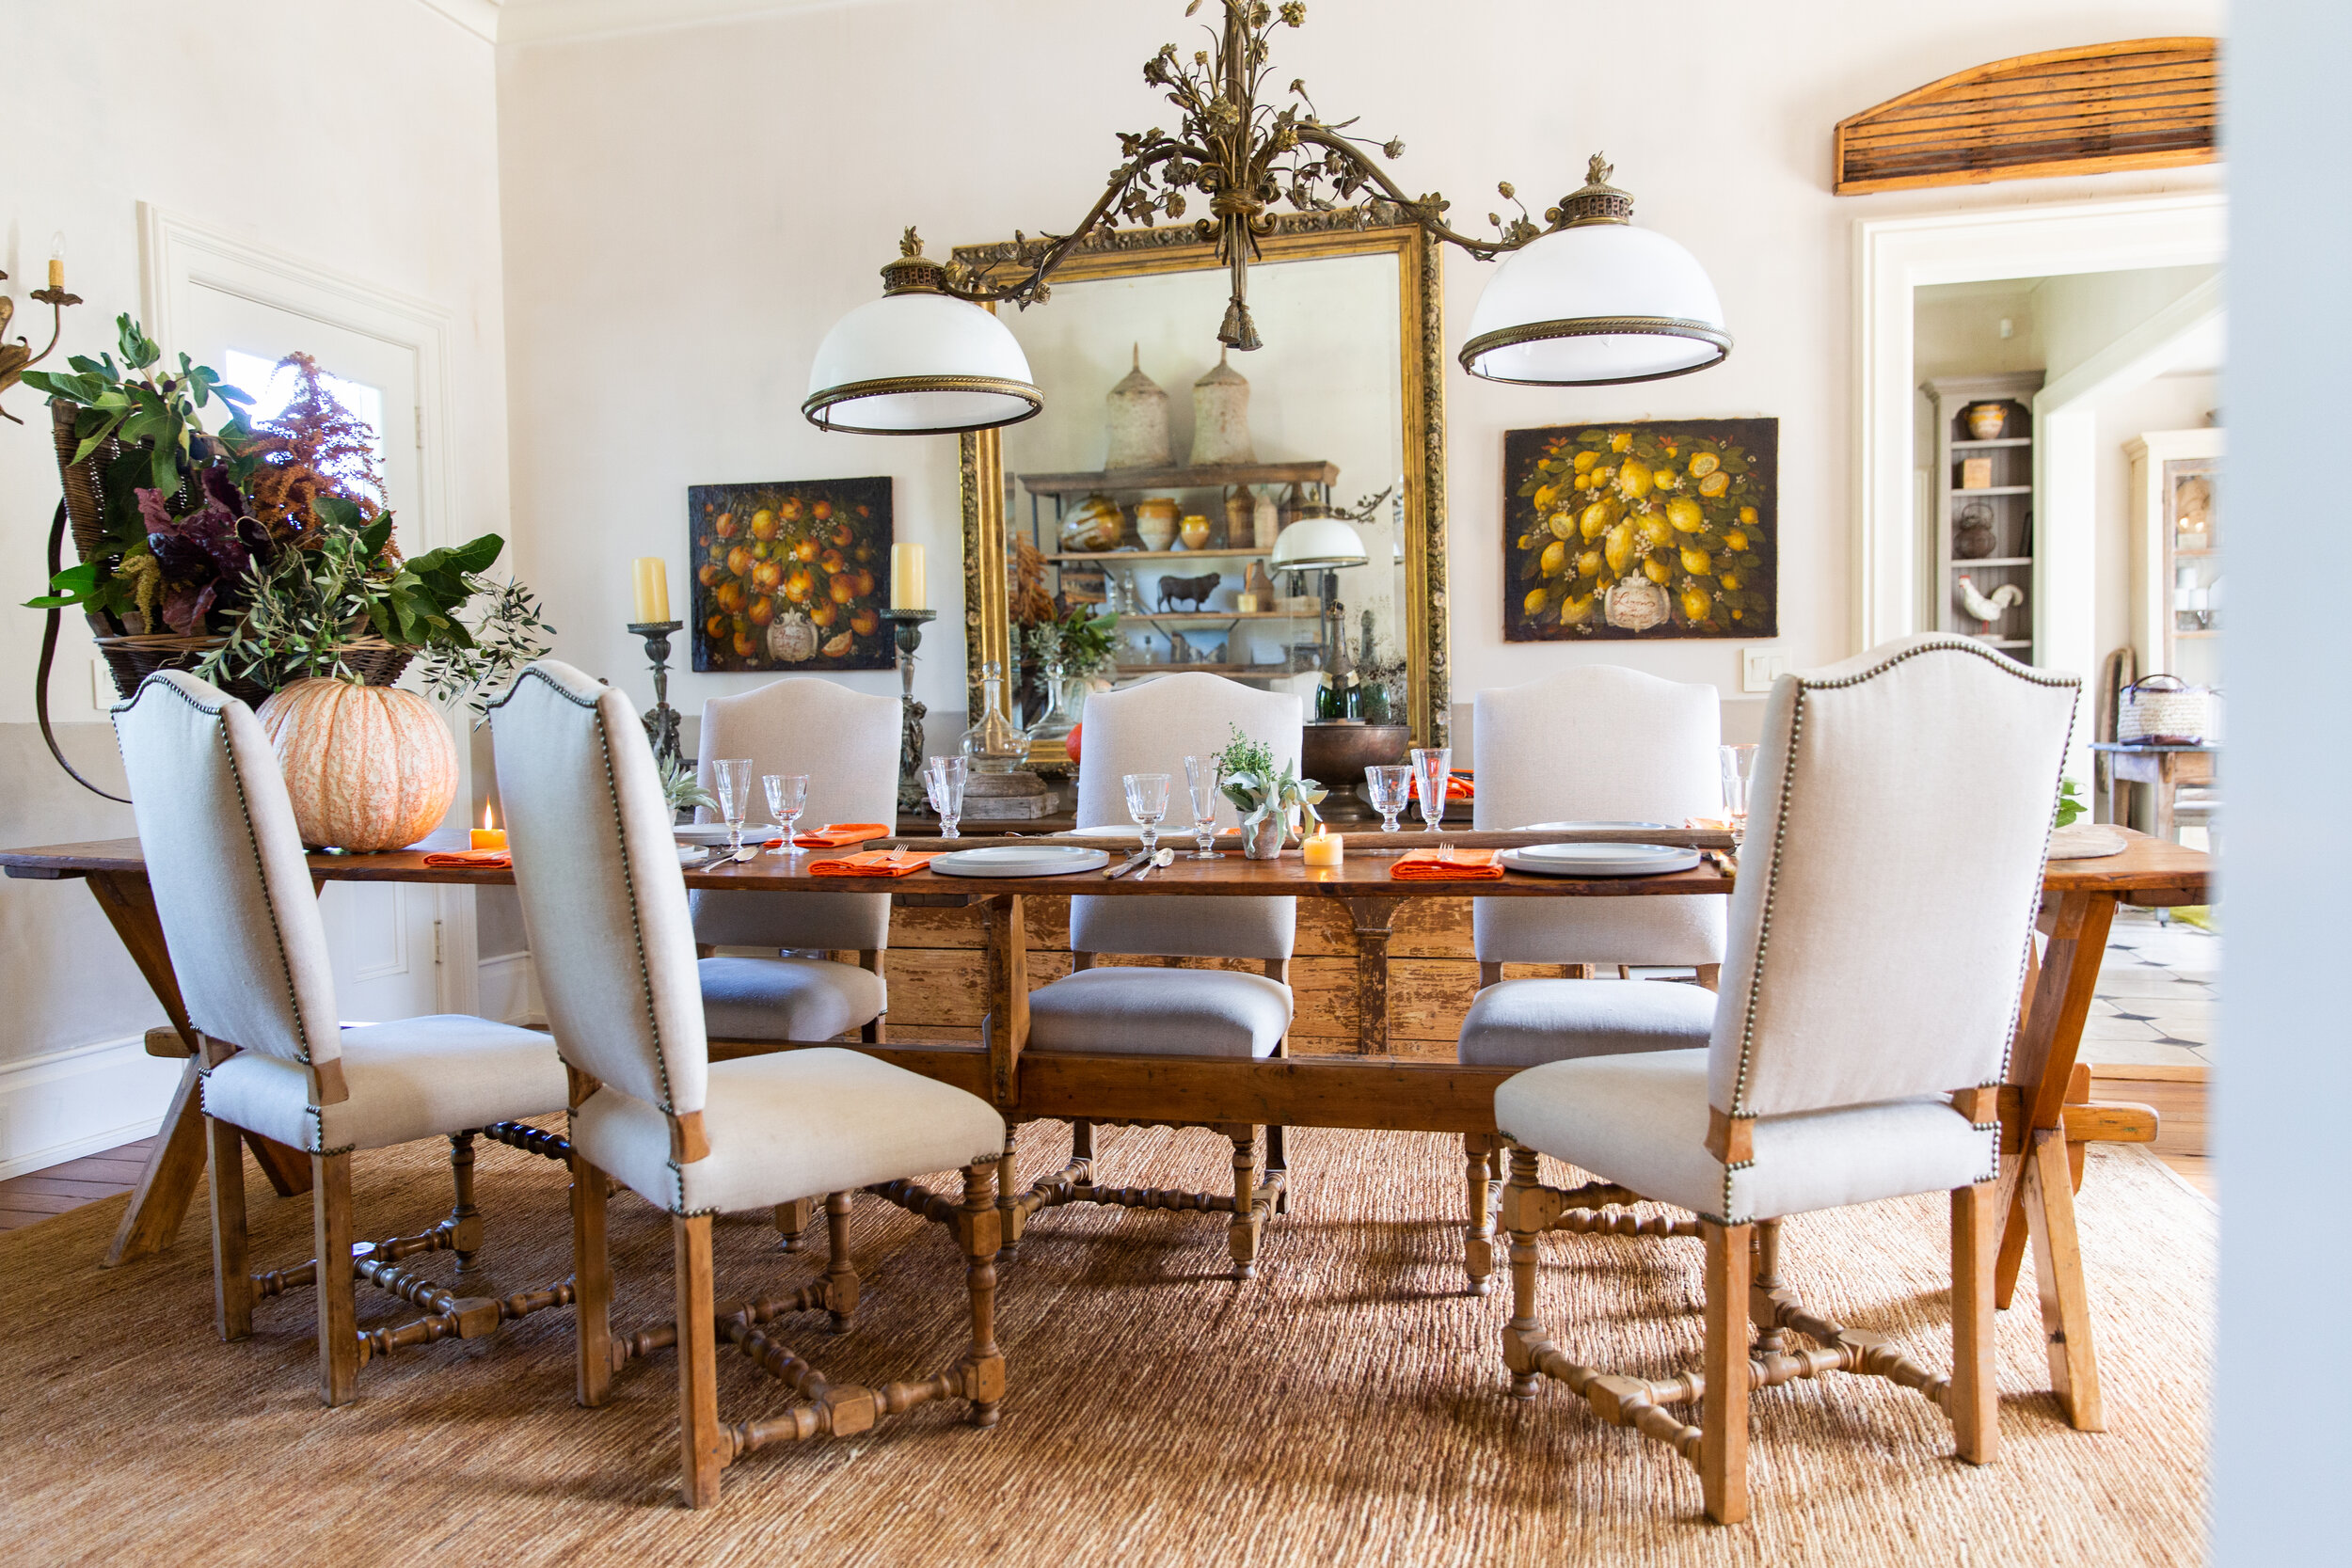 Fall Tabletop, Harvest Tabletop, Decorating with Pumpkins, Decorating with French Antiques | Chateau Sonoma